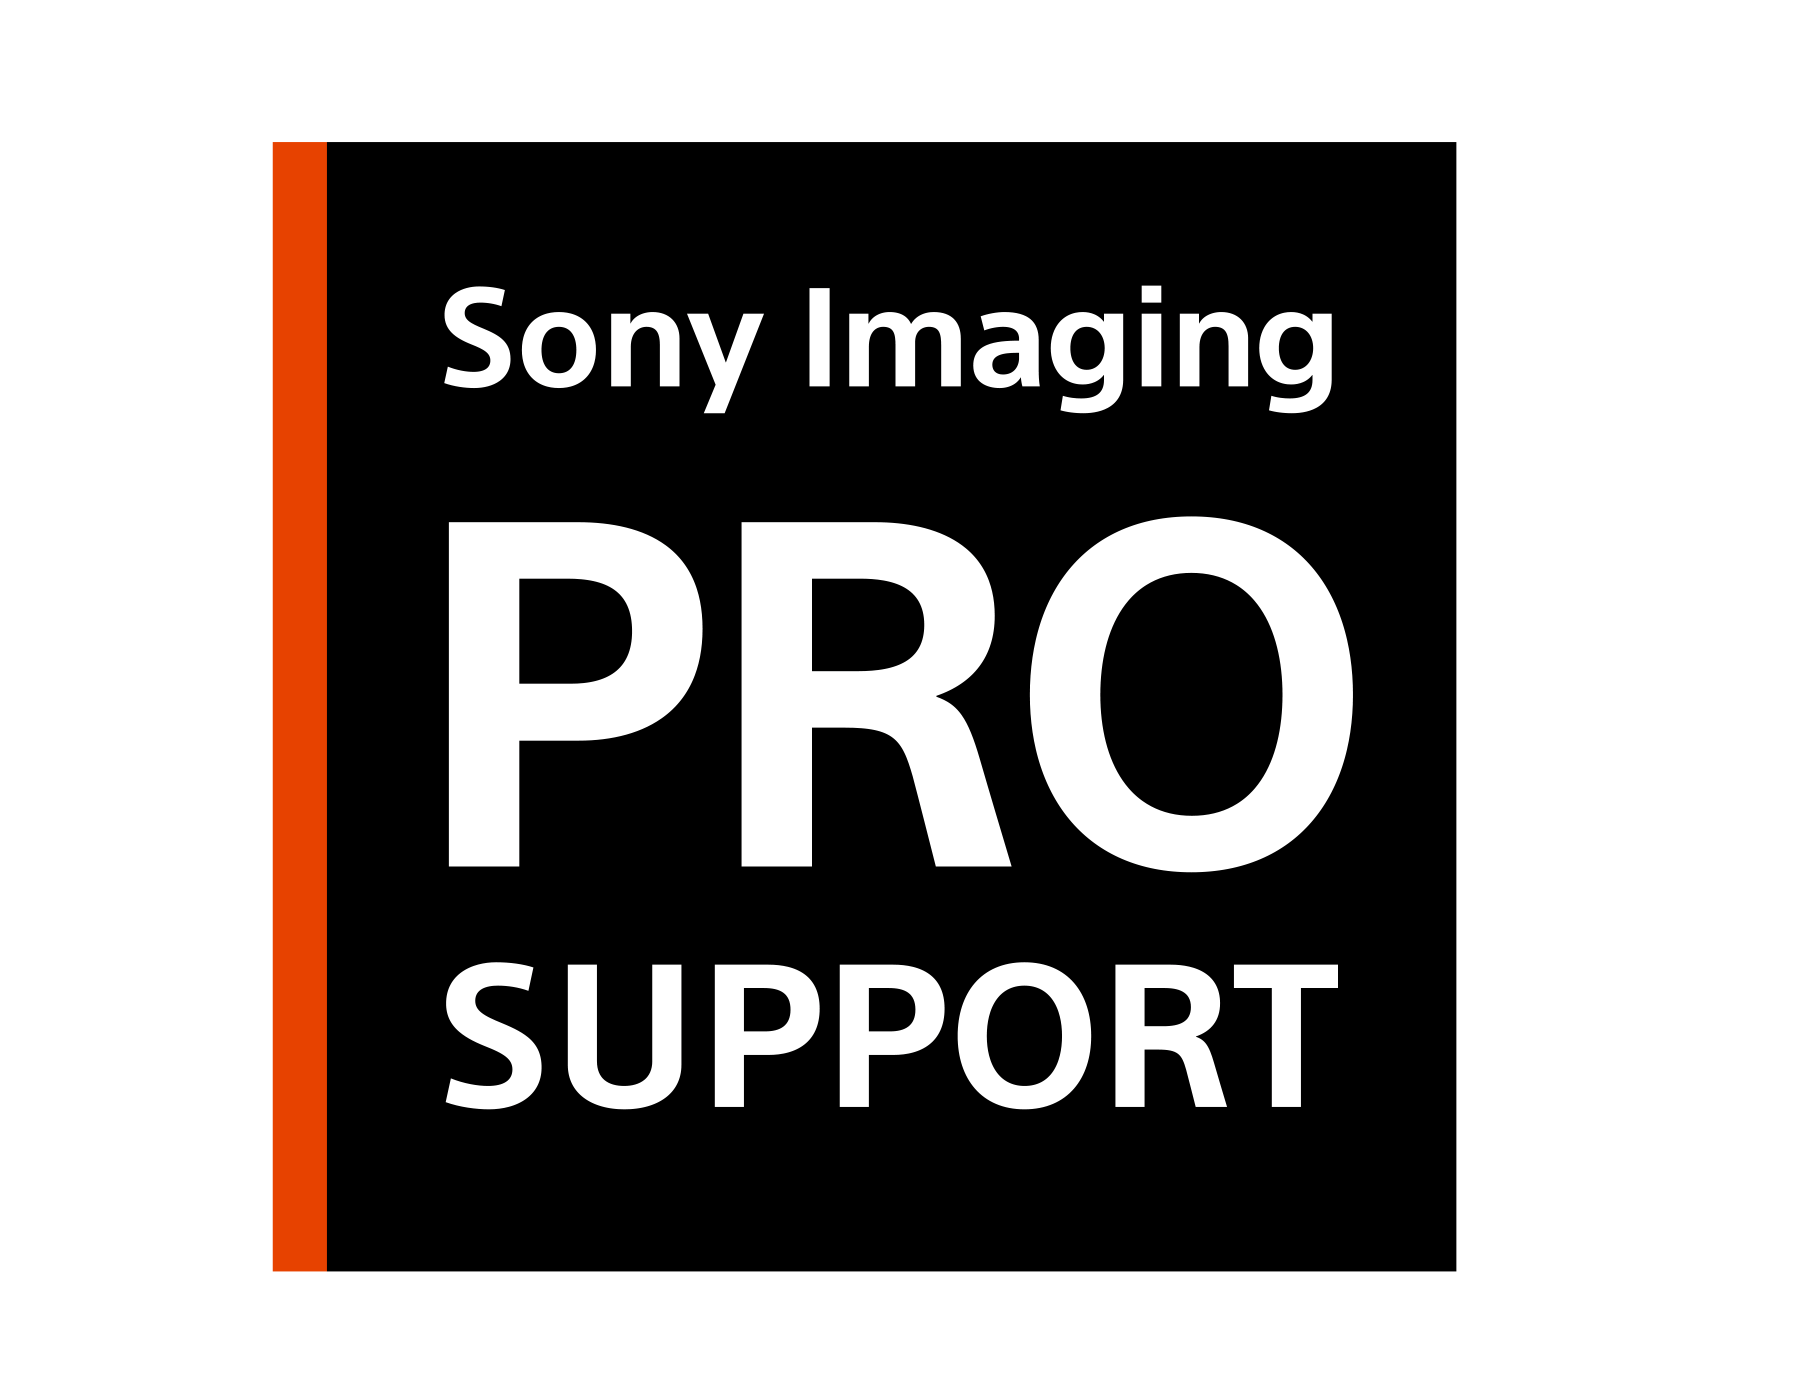 Sony Imaging Pro Support: Adventure Theory Media